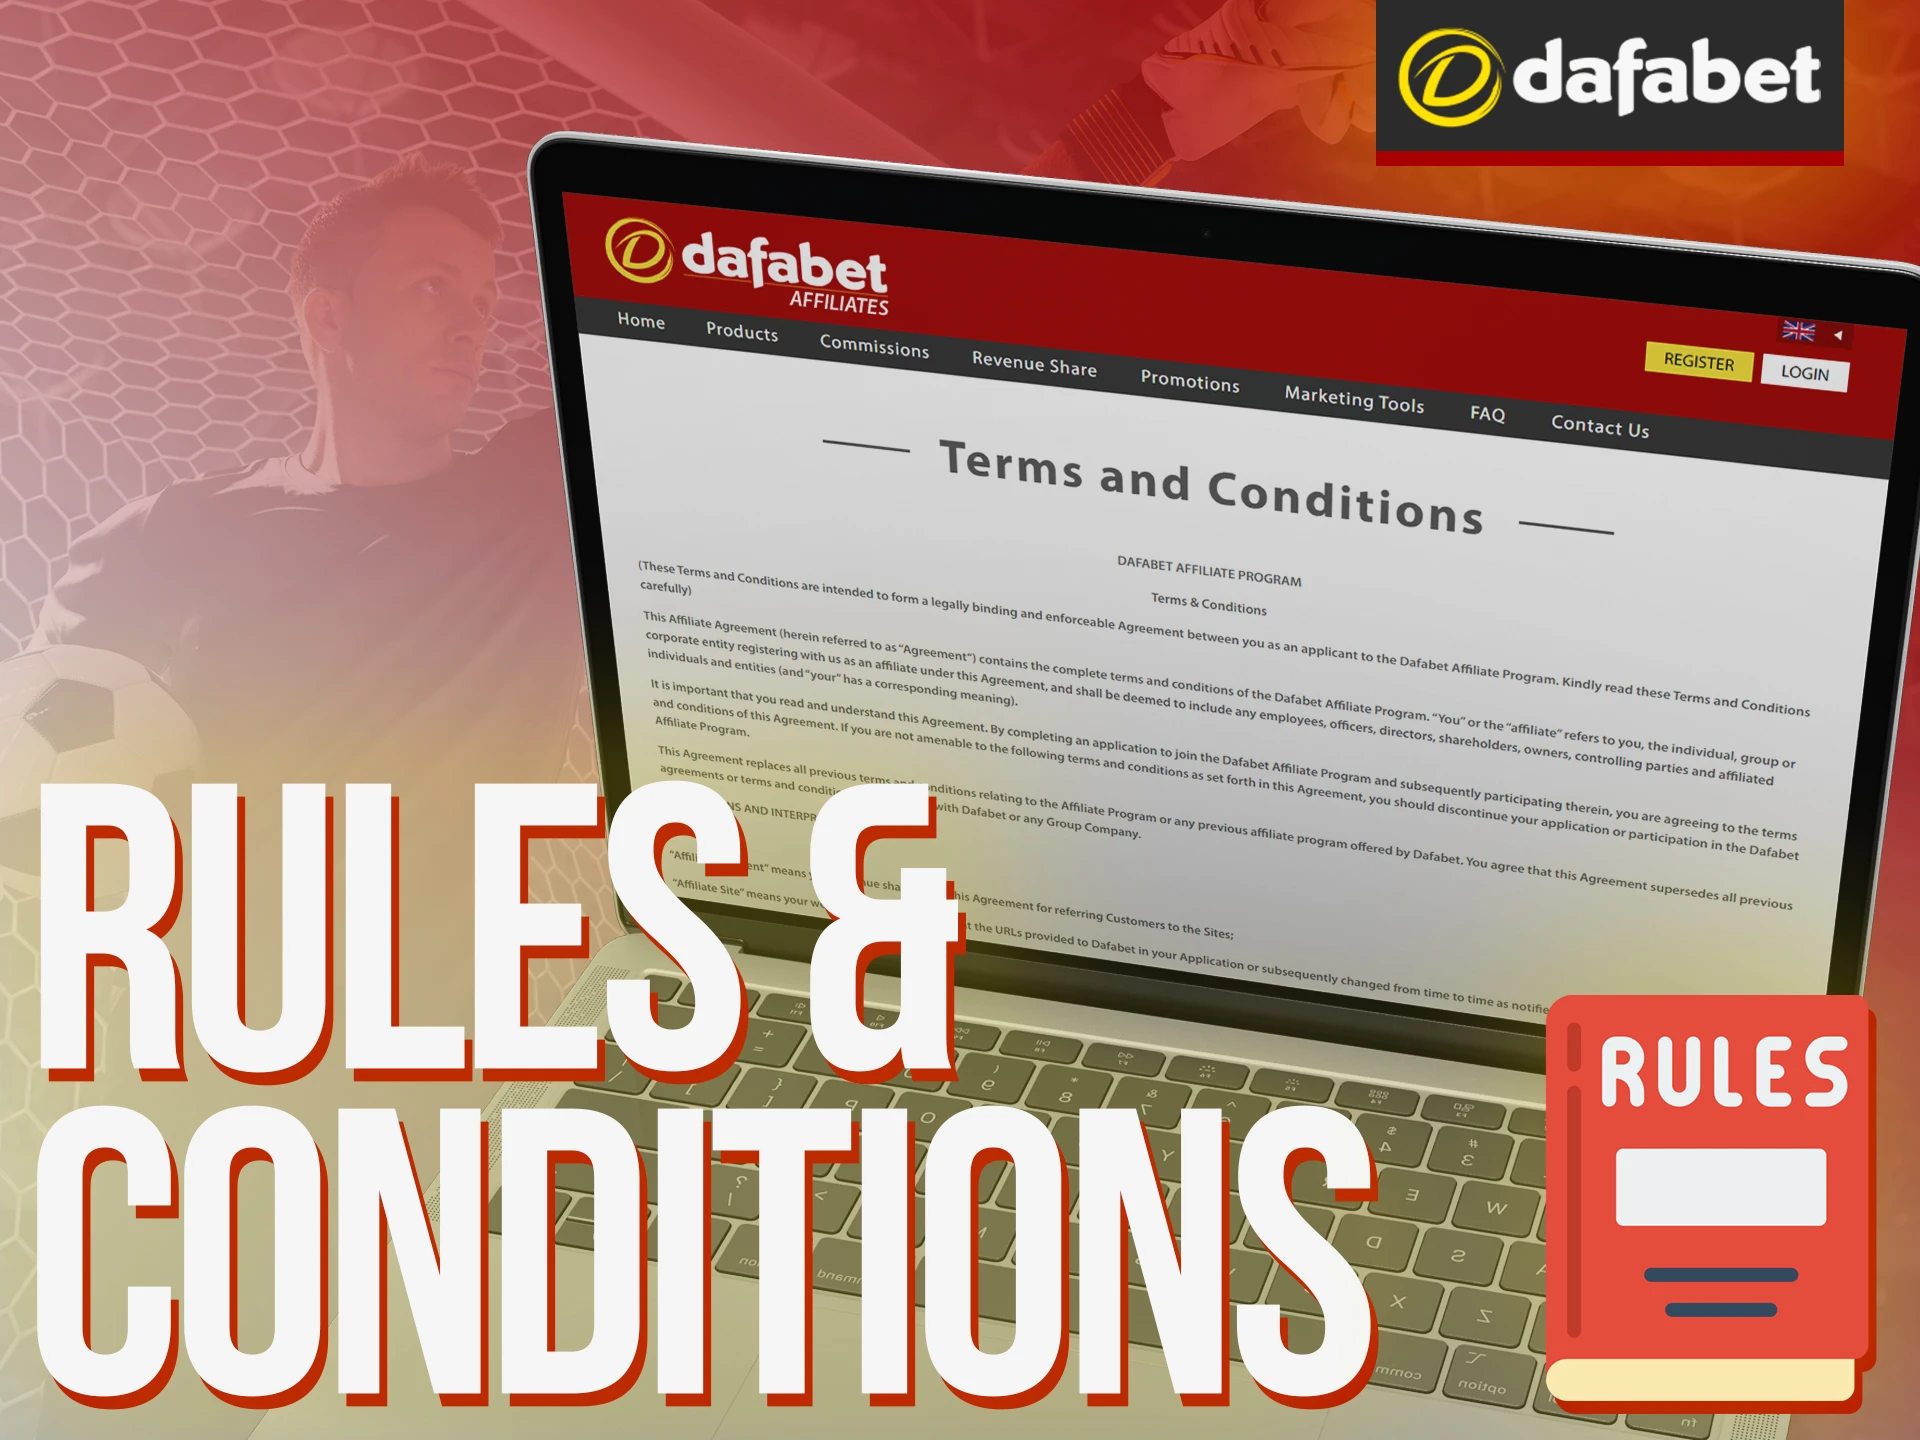 Read terms and conditions of Dafabet Affiliate Program before you join in.